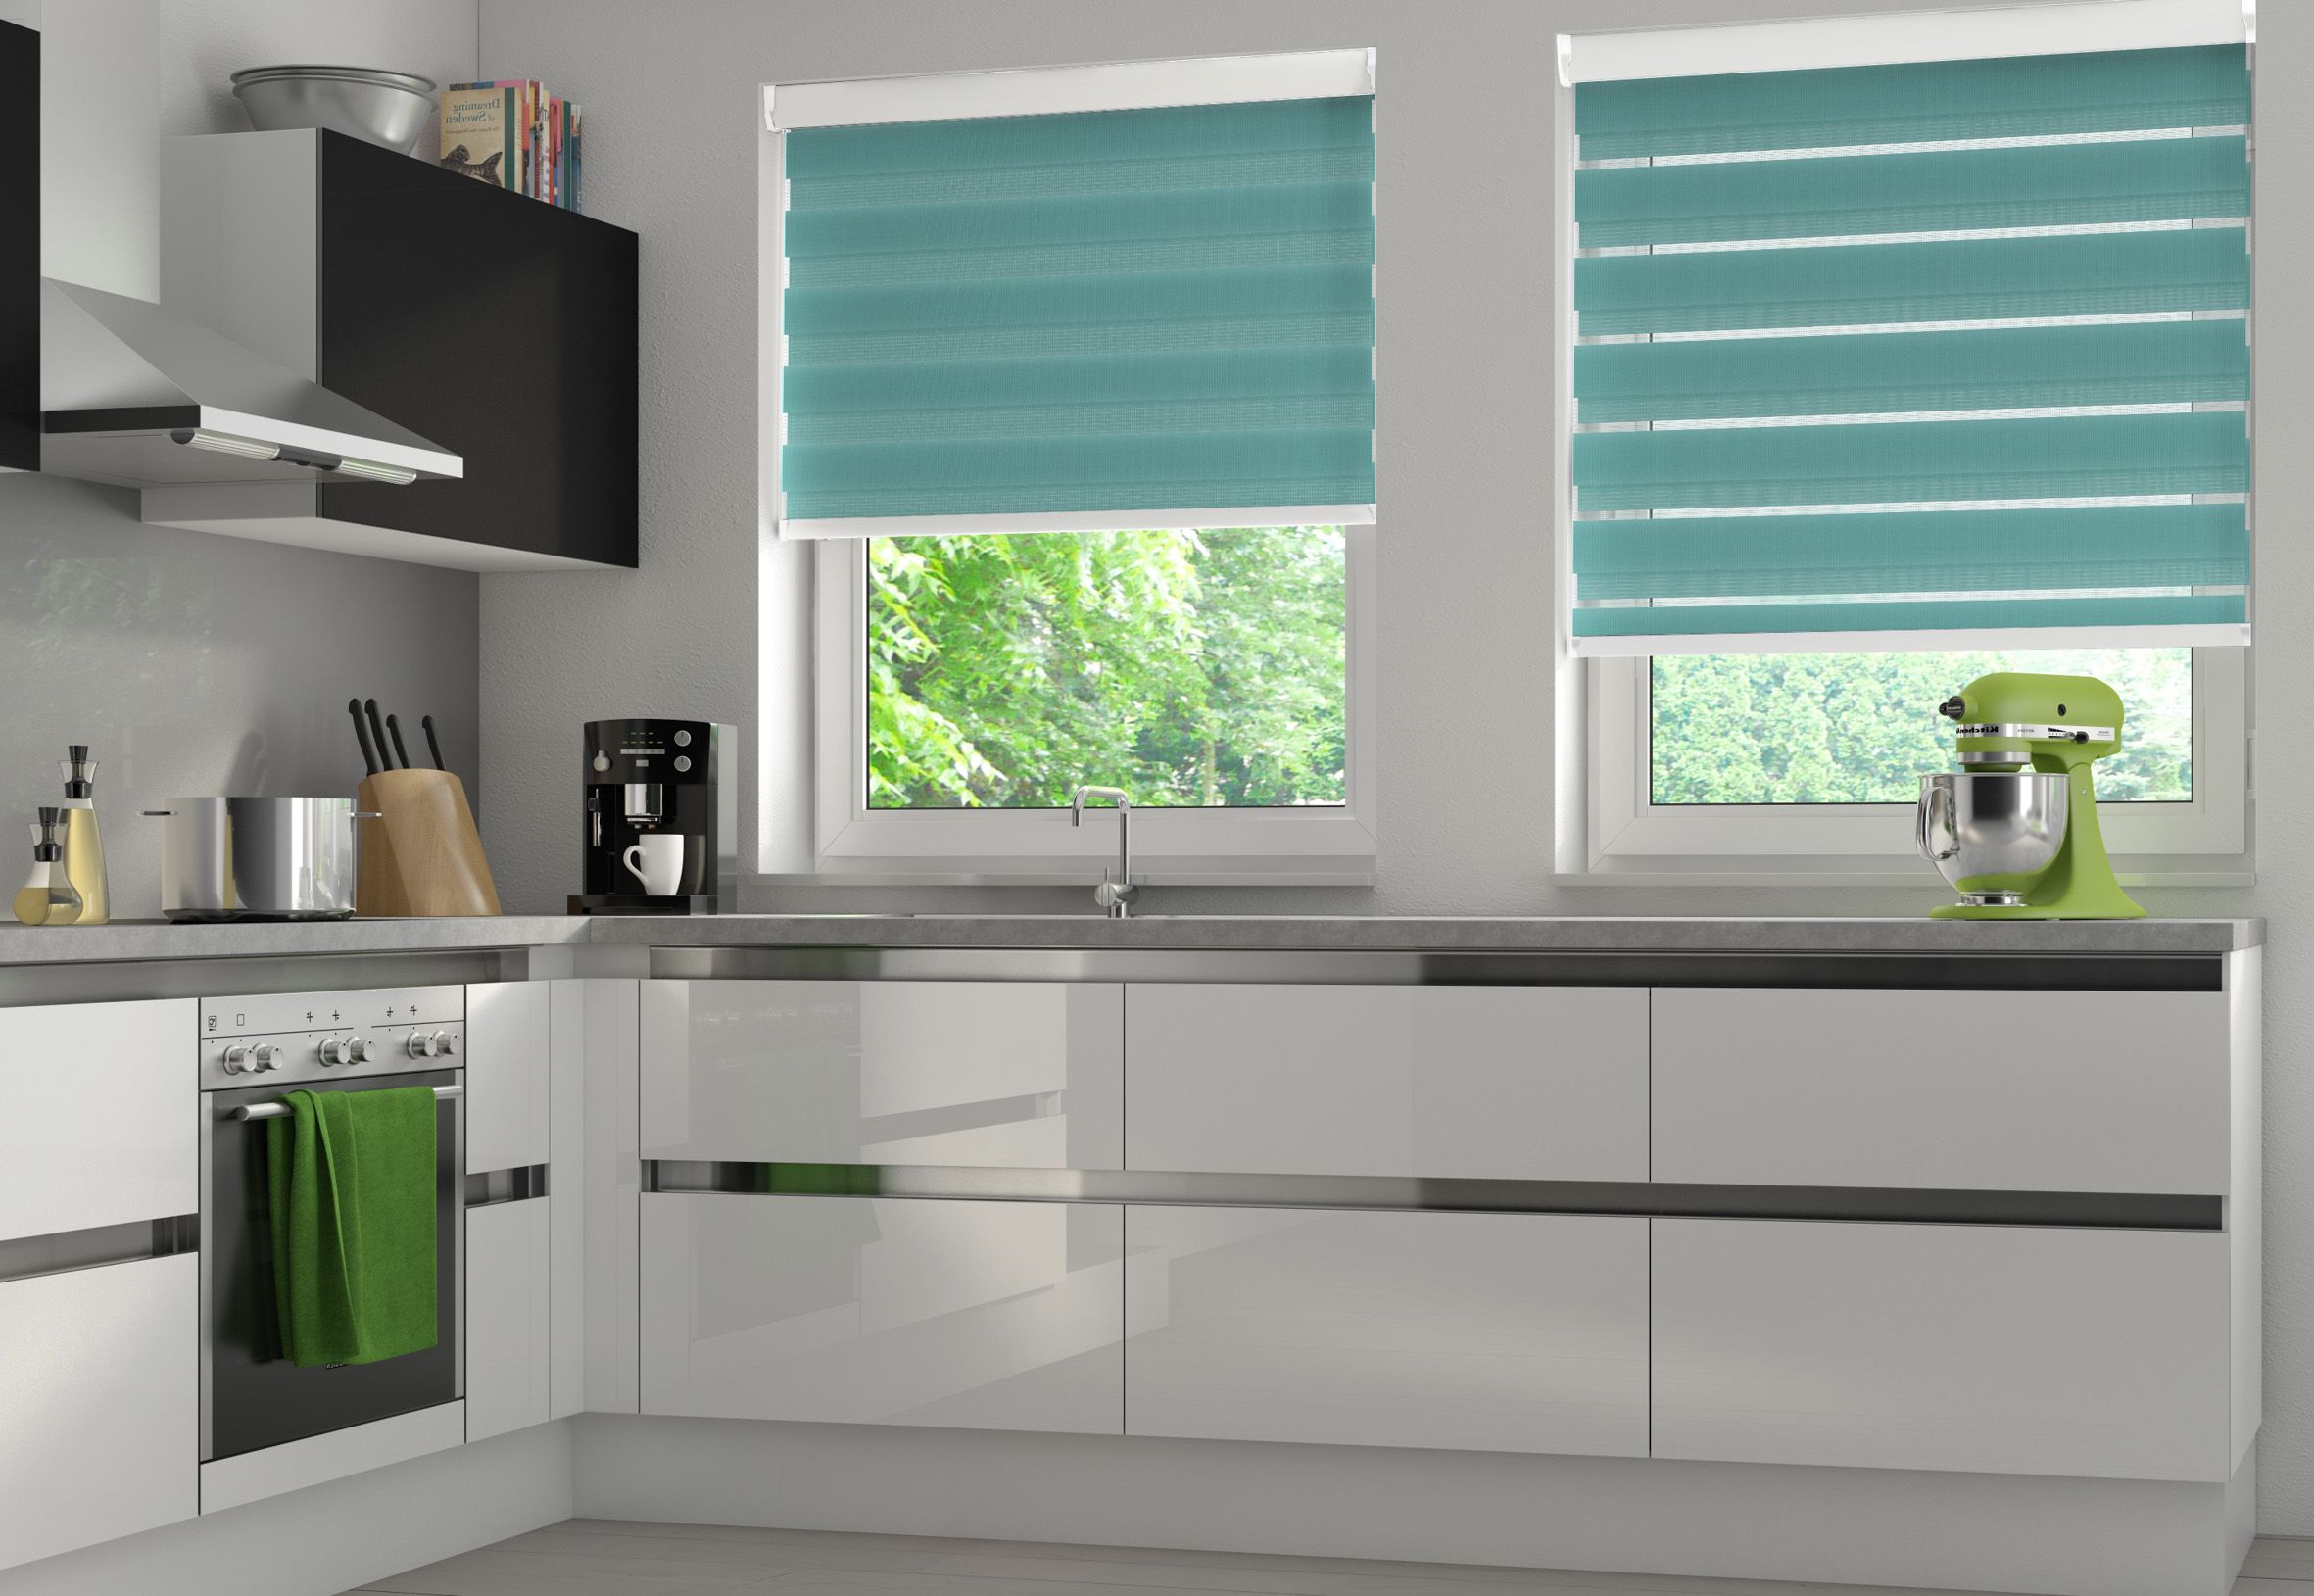 Essence Teal Day & Night | Vision Blinds / Day & Night Blinds ...